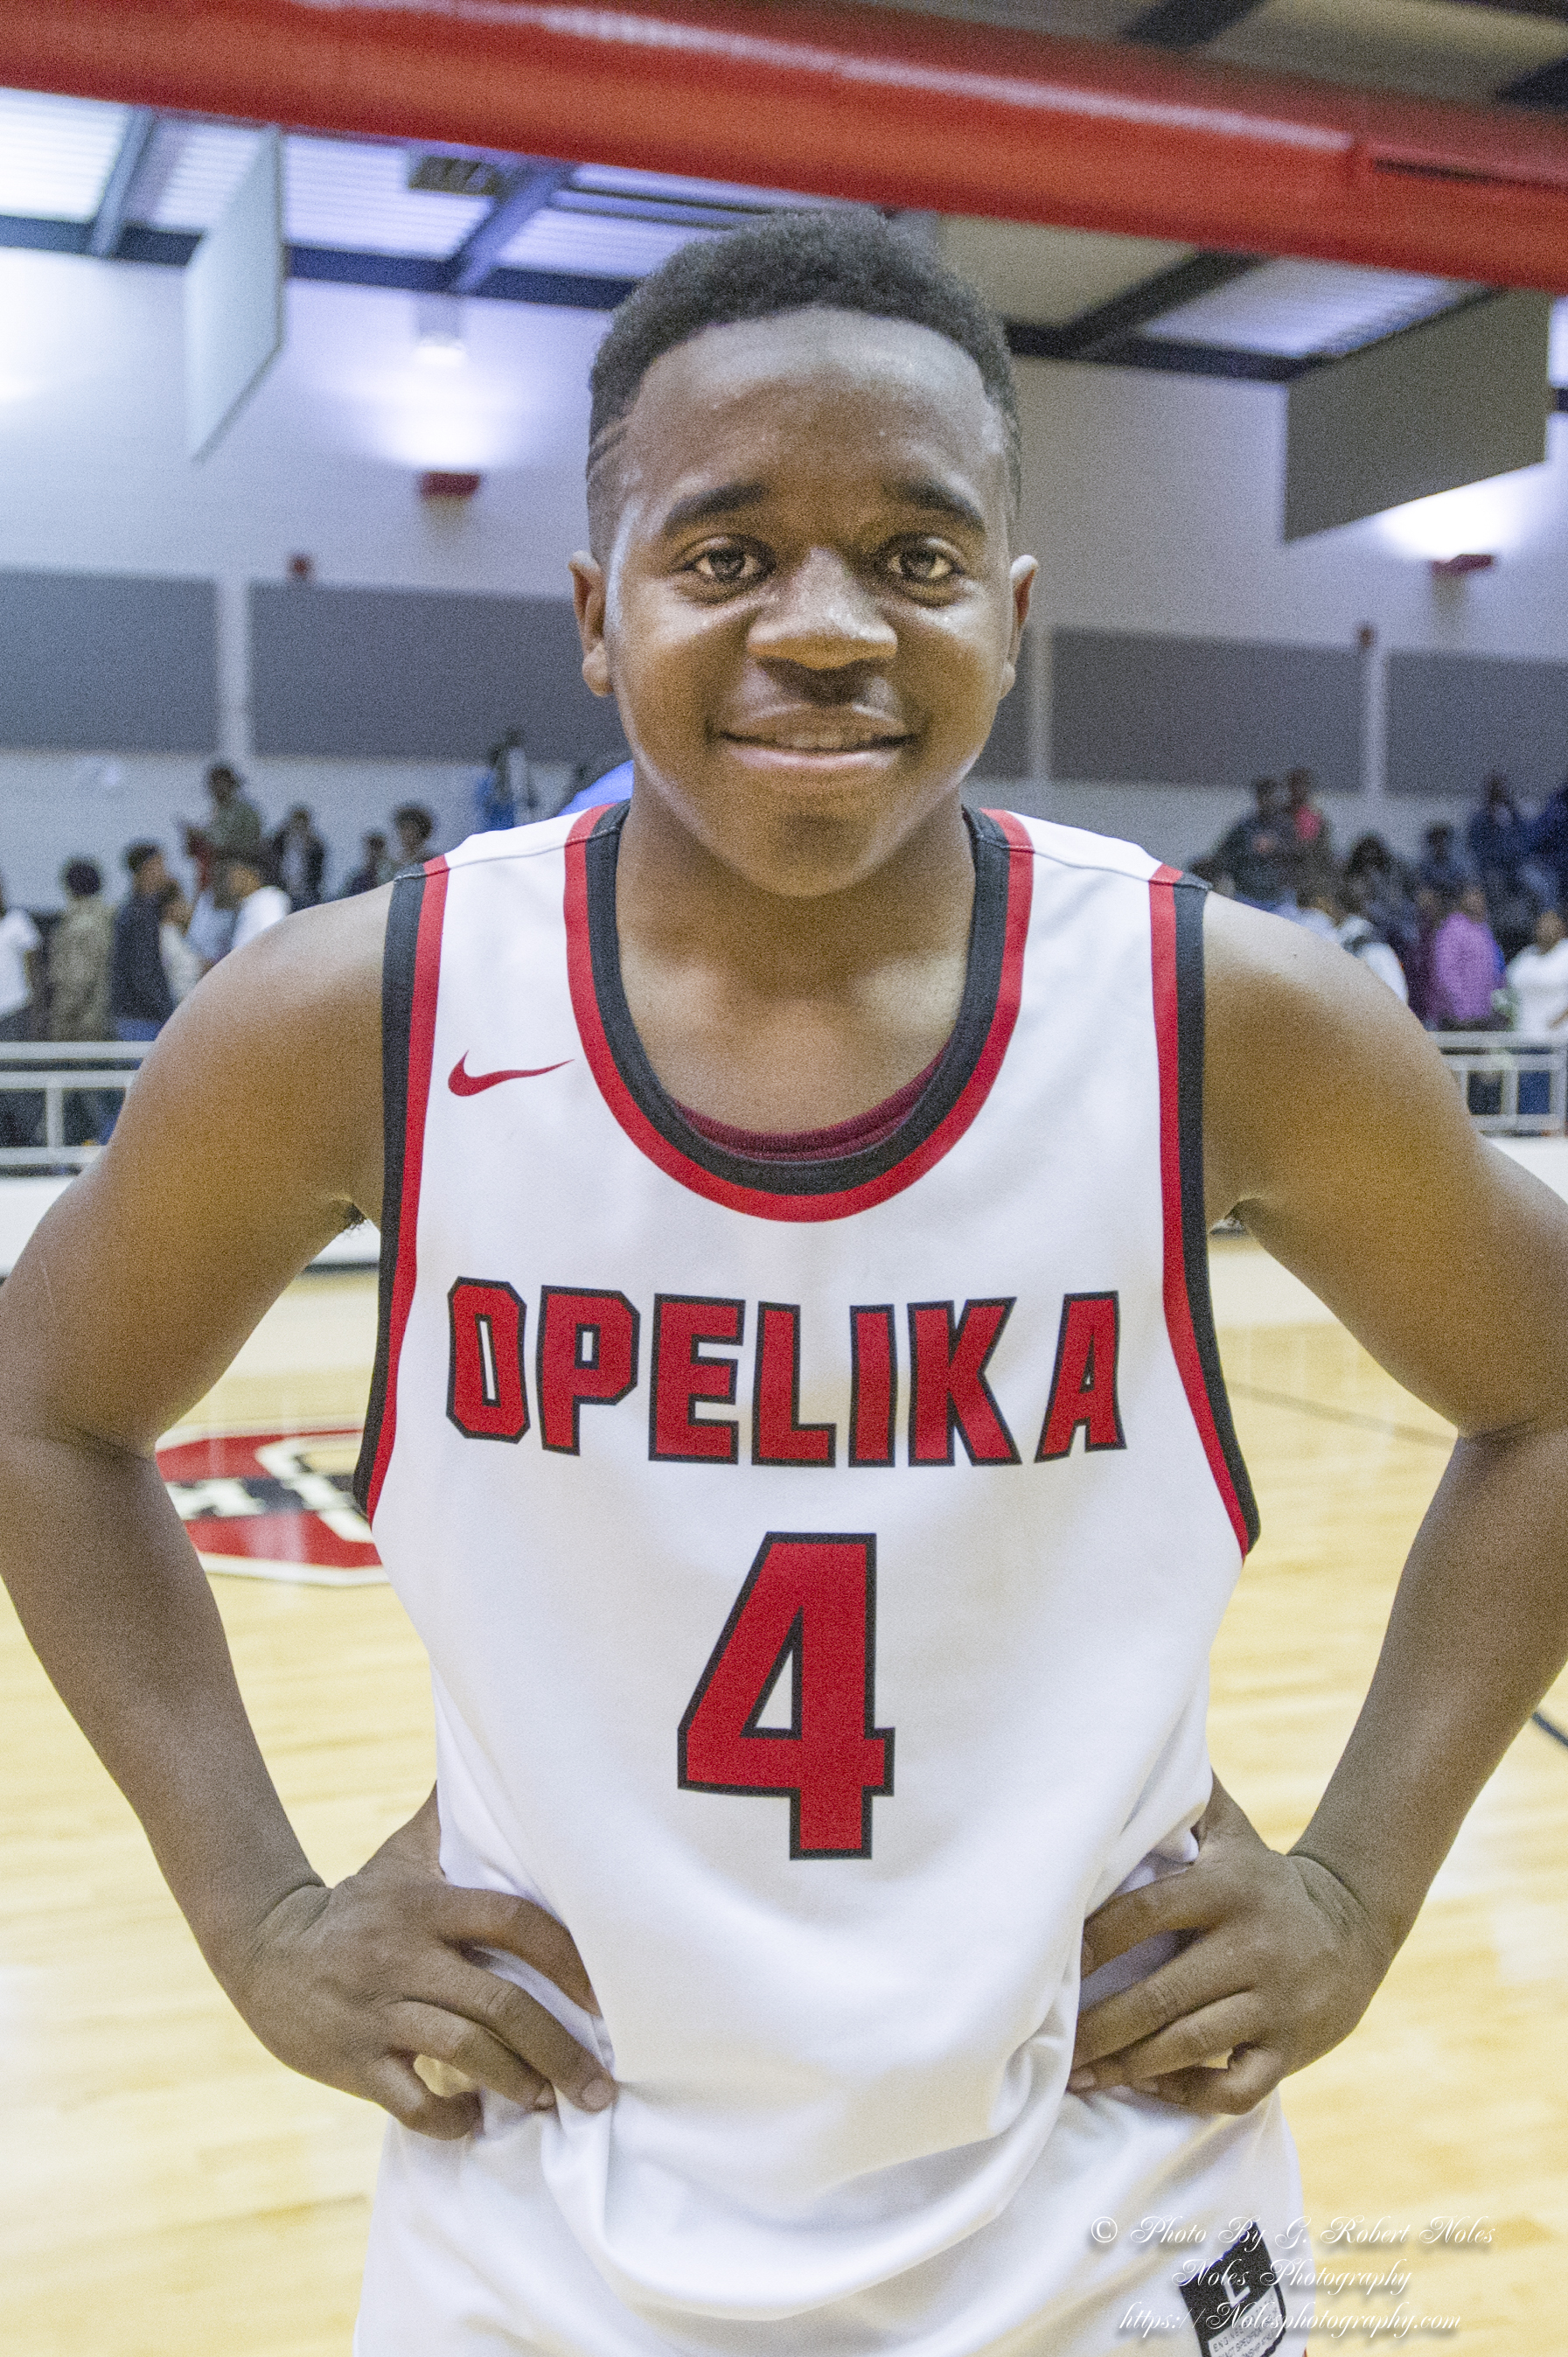 Opelika’s Pitts to pursue walk-on sport at Alabama